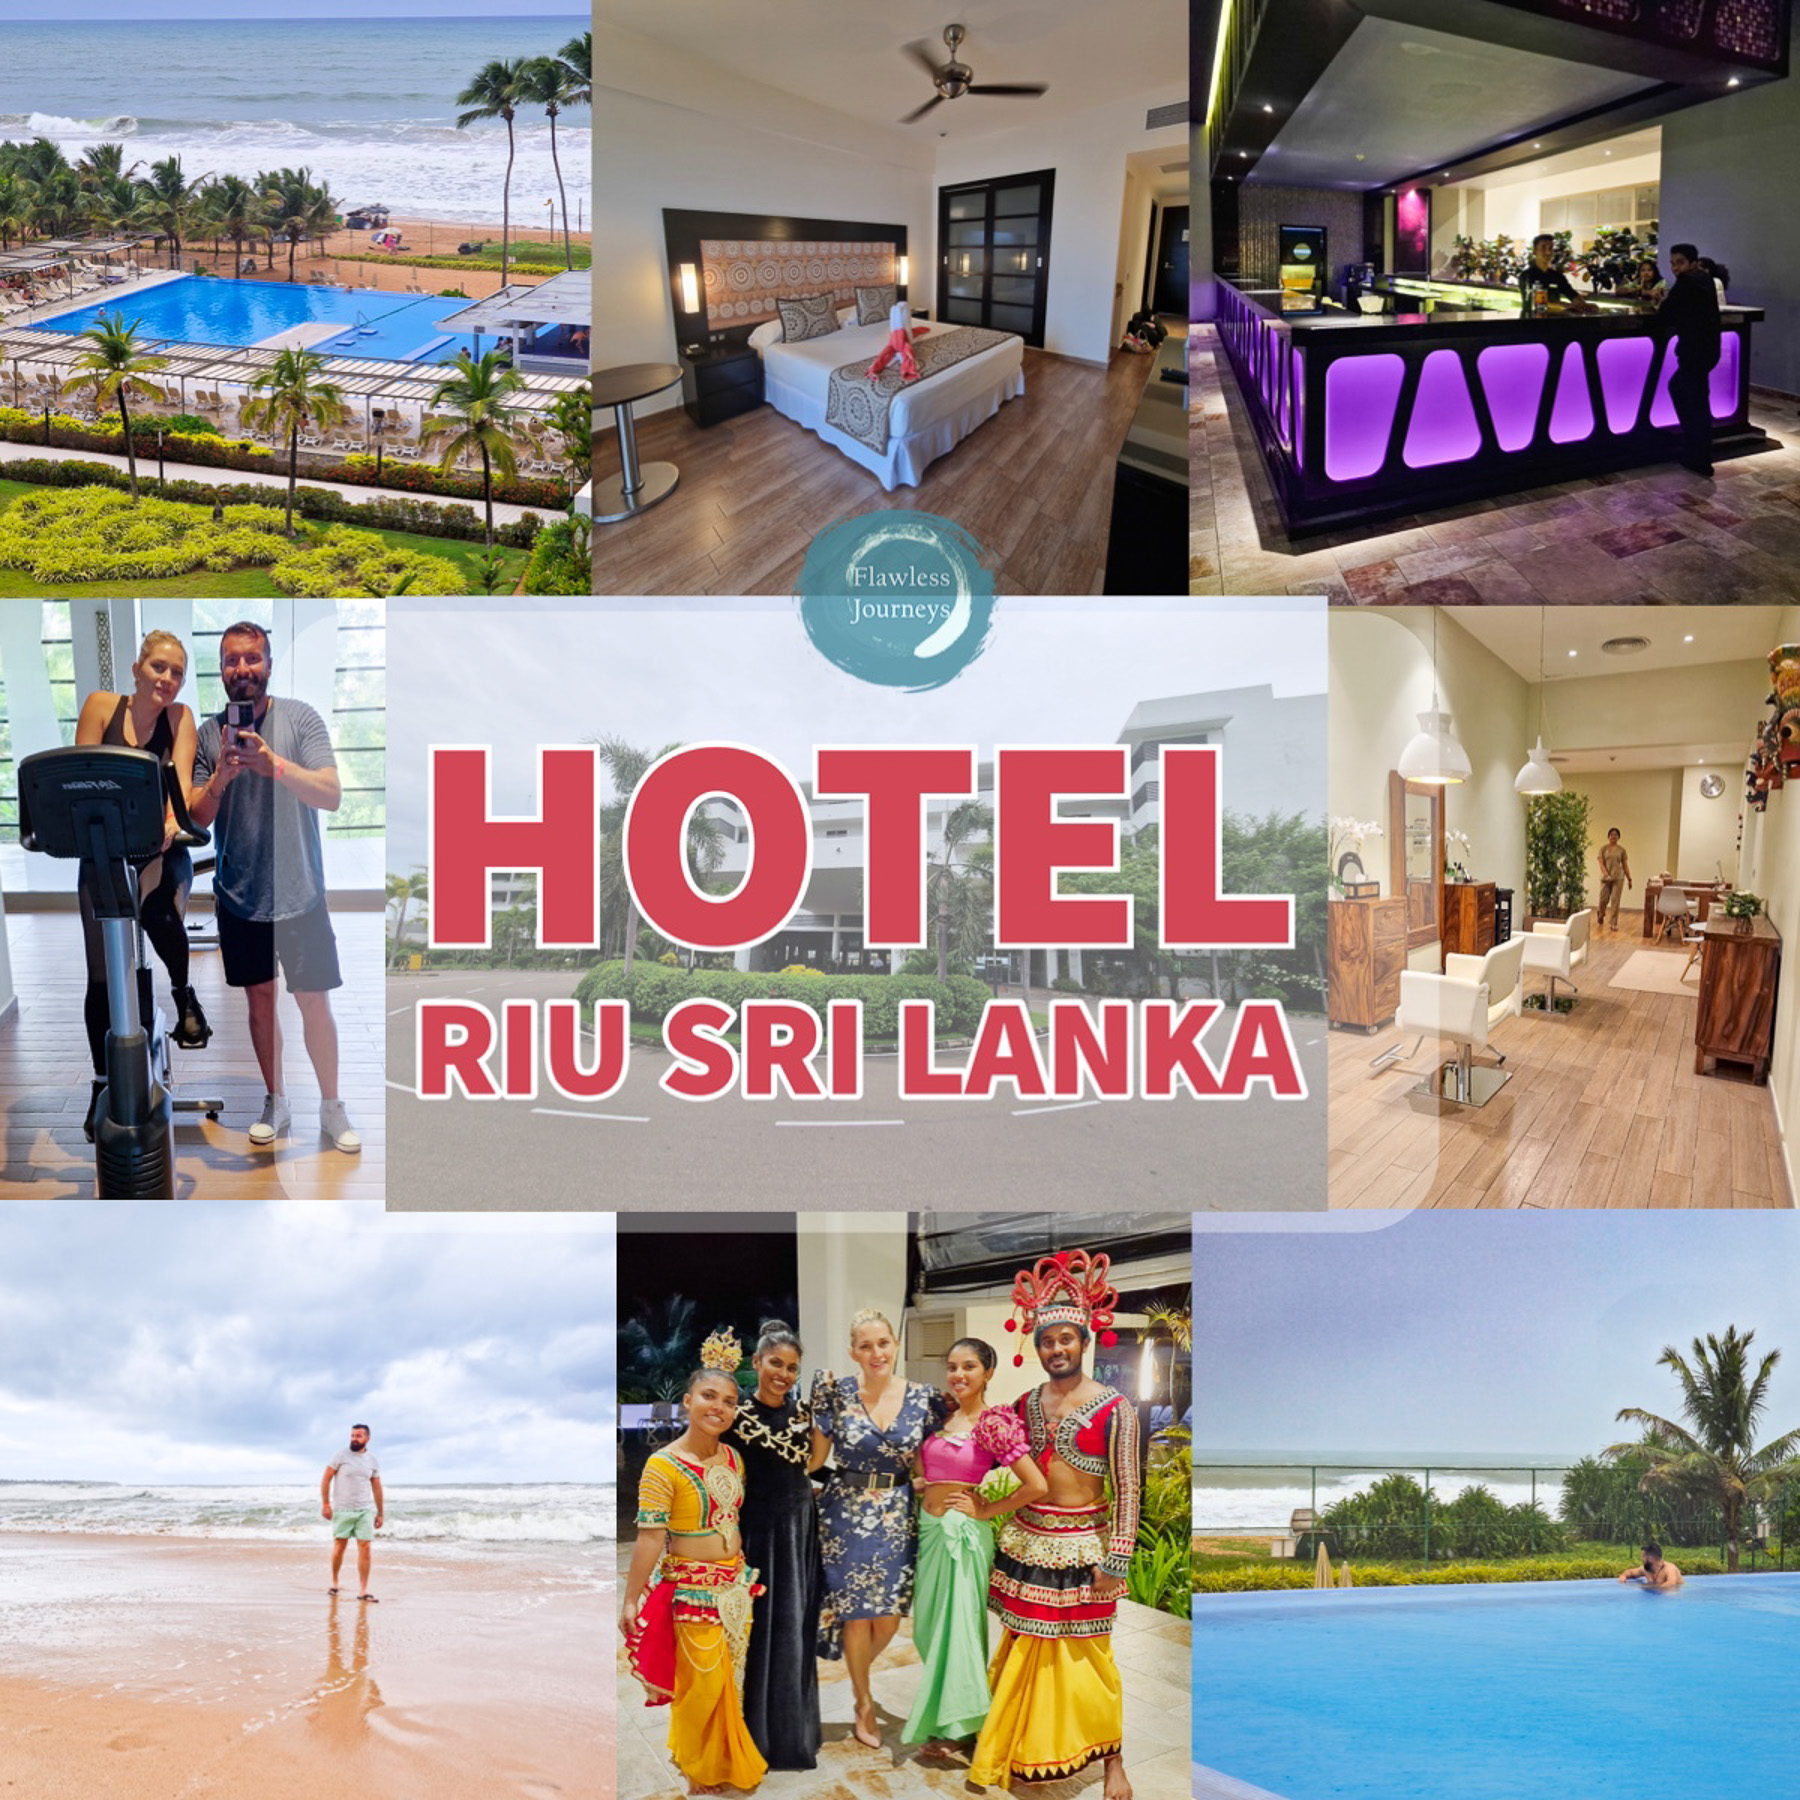 Pictures of our stay at Riu Sri Lanka